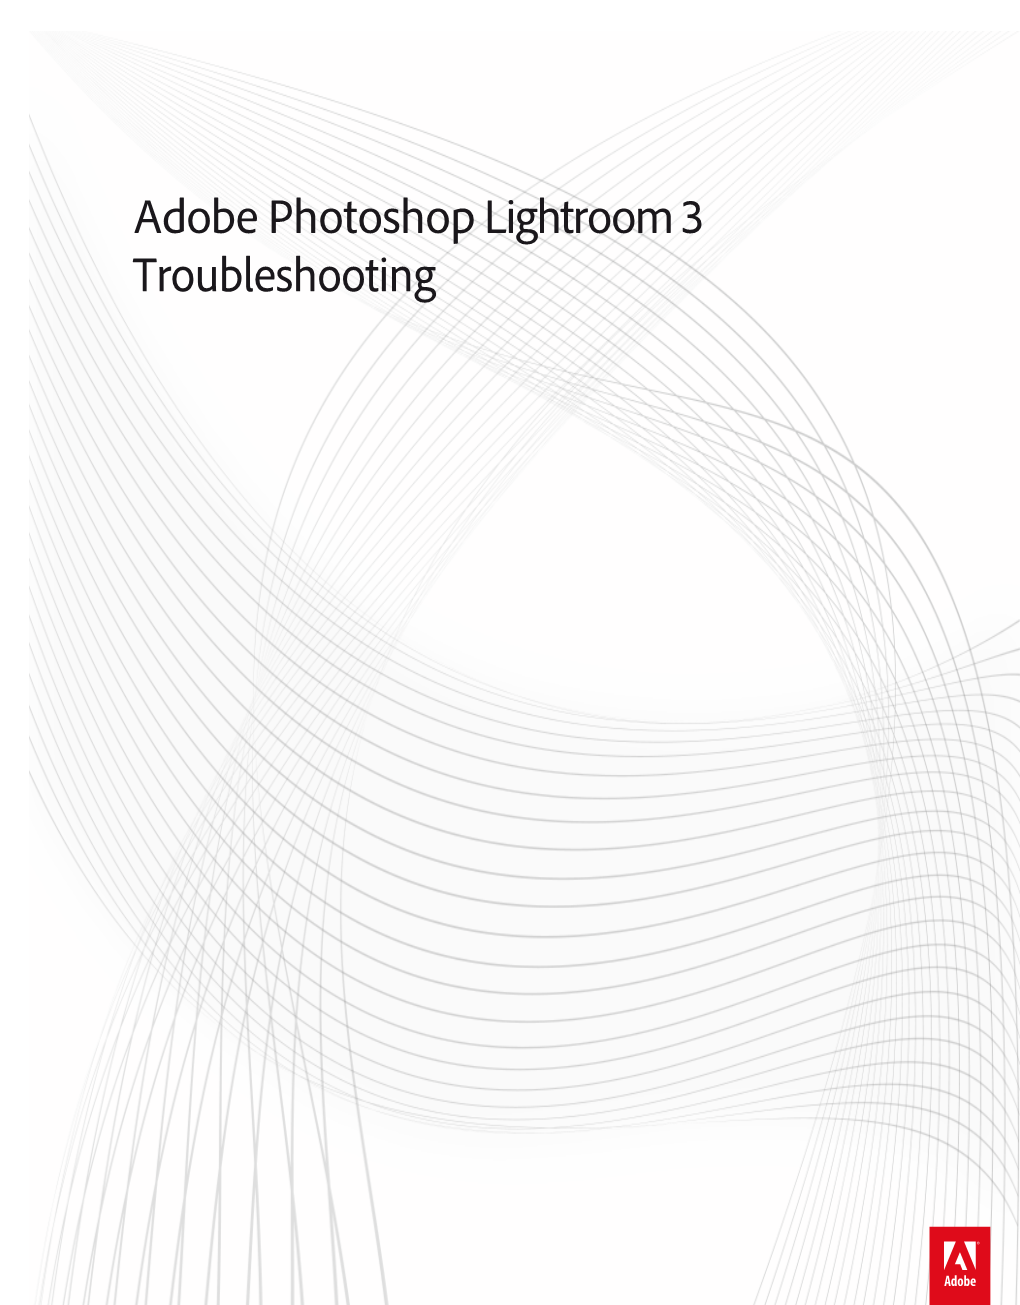 Adobe Photoshop Lightroom 3 Troubleshooting Legal Notices